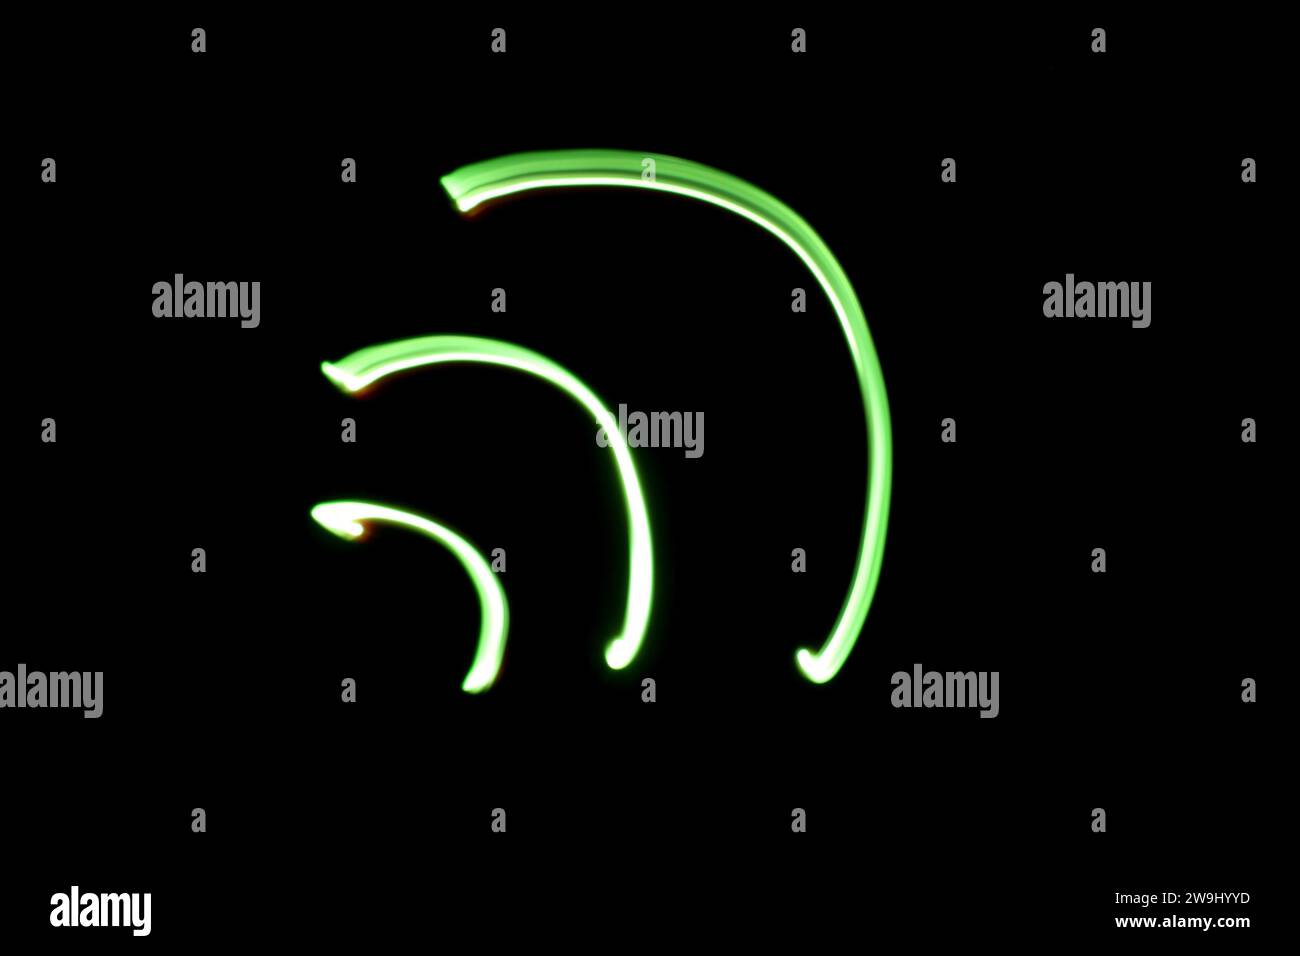 A photograph of a wireless wifi signal symbol in vibrant green light in a long exposure photo against a black background. Light painting photography Stock Photo